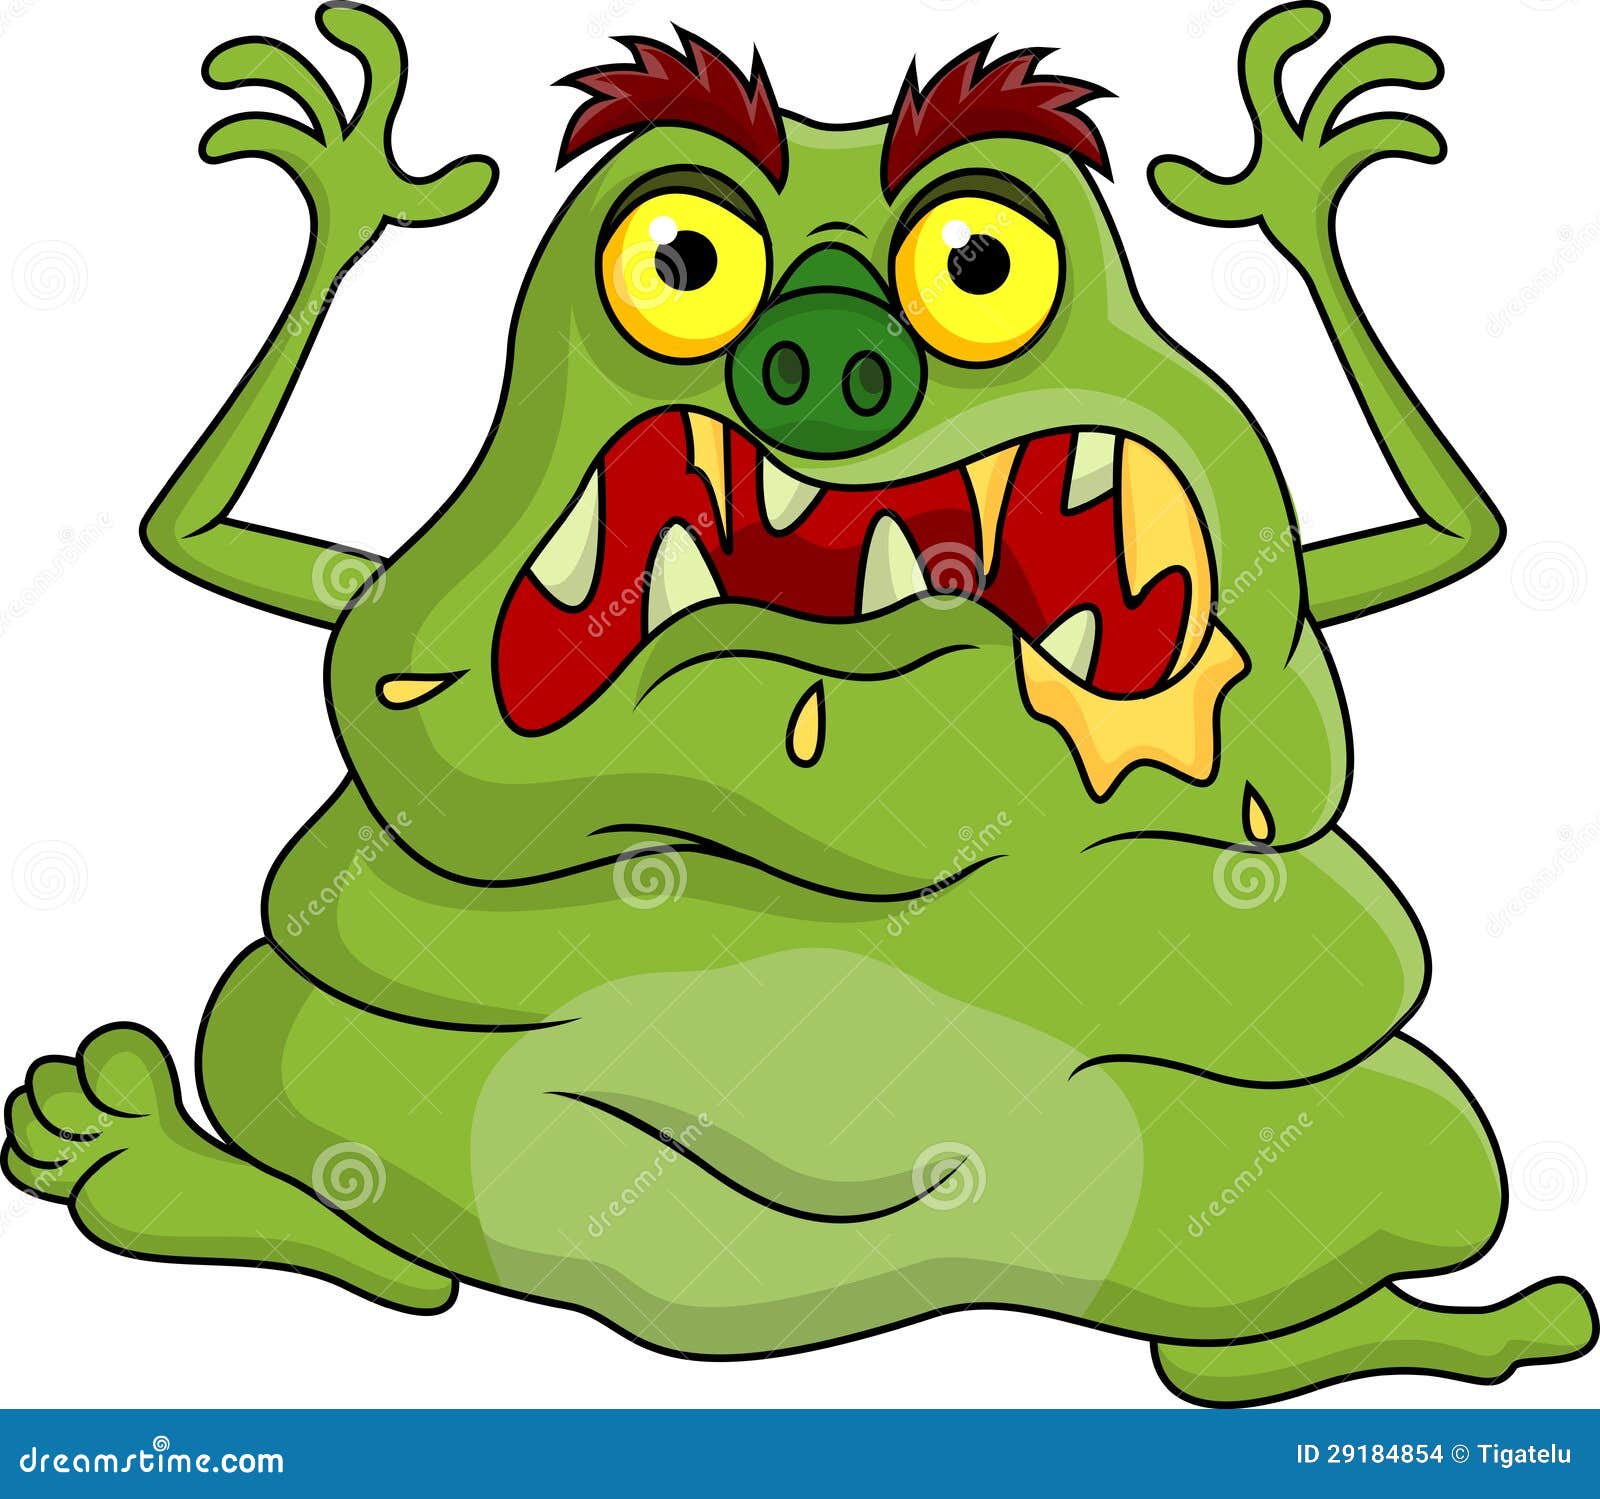 ugly clipart images - photo #22